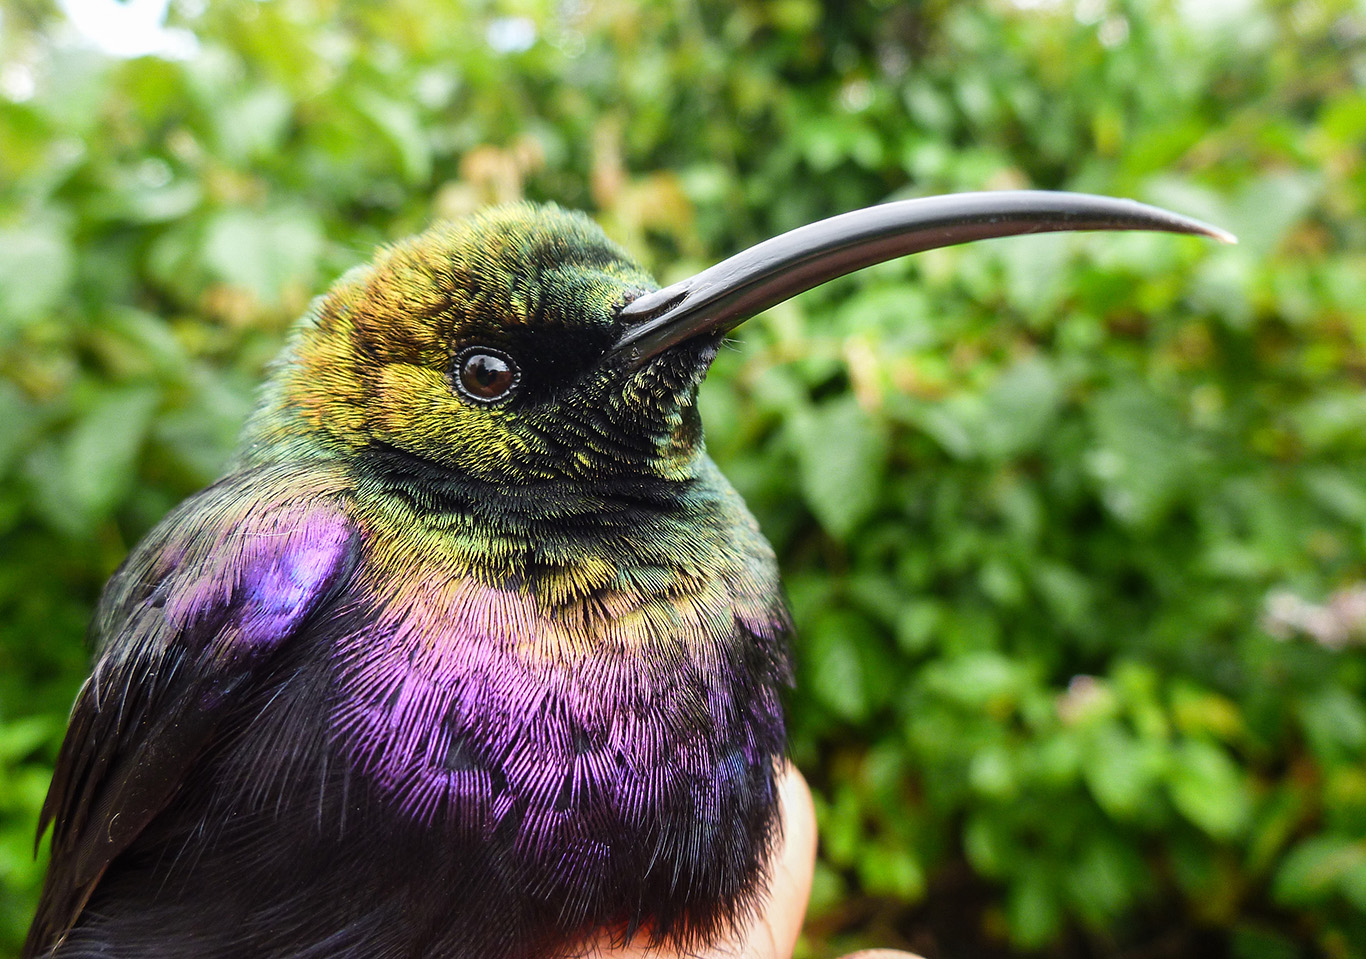 A Tacazze sunbird caught and released during the study. It's a nectar-eating bird in Ethiopian forests.